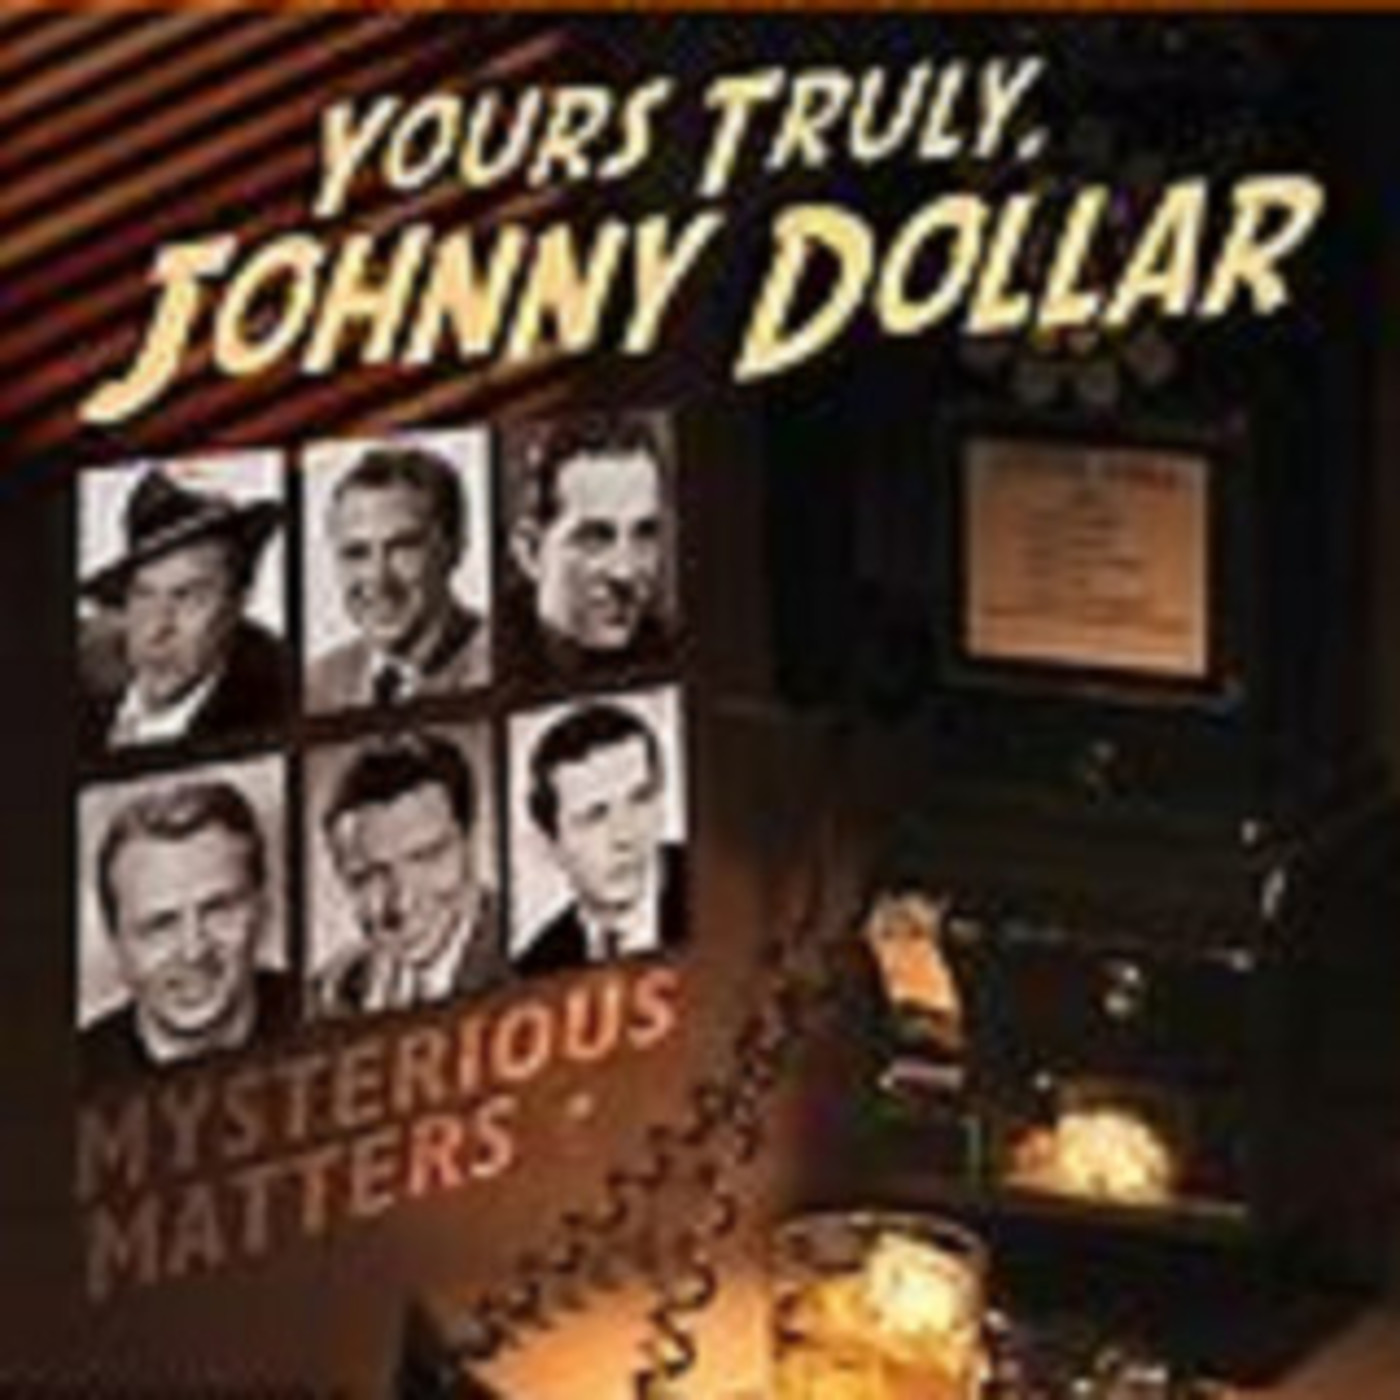 Yours Truly, Johnny Dollar - 102961, episode 764 - The Bee or Not to Bee Matter